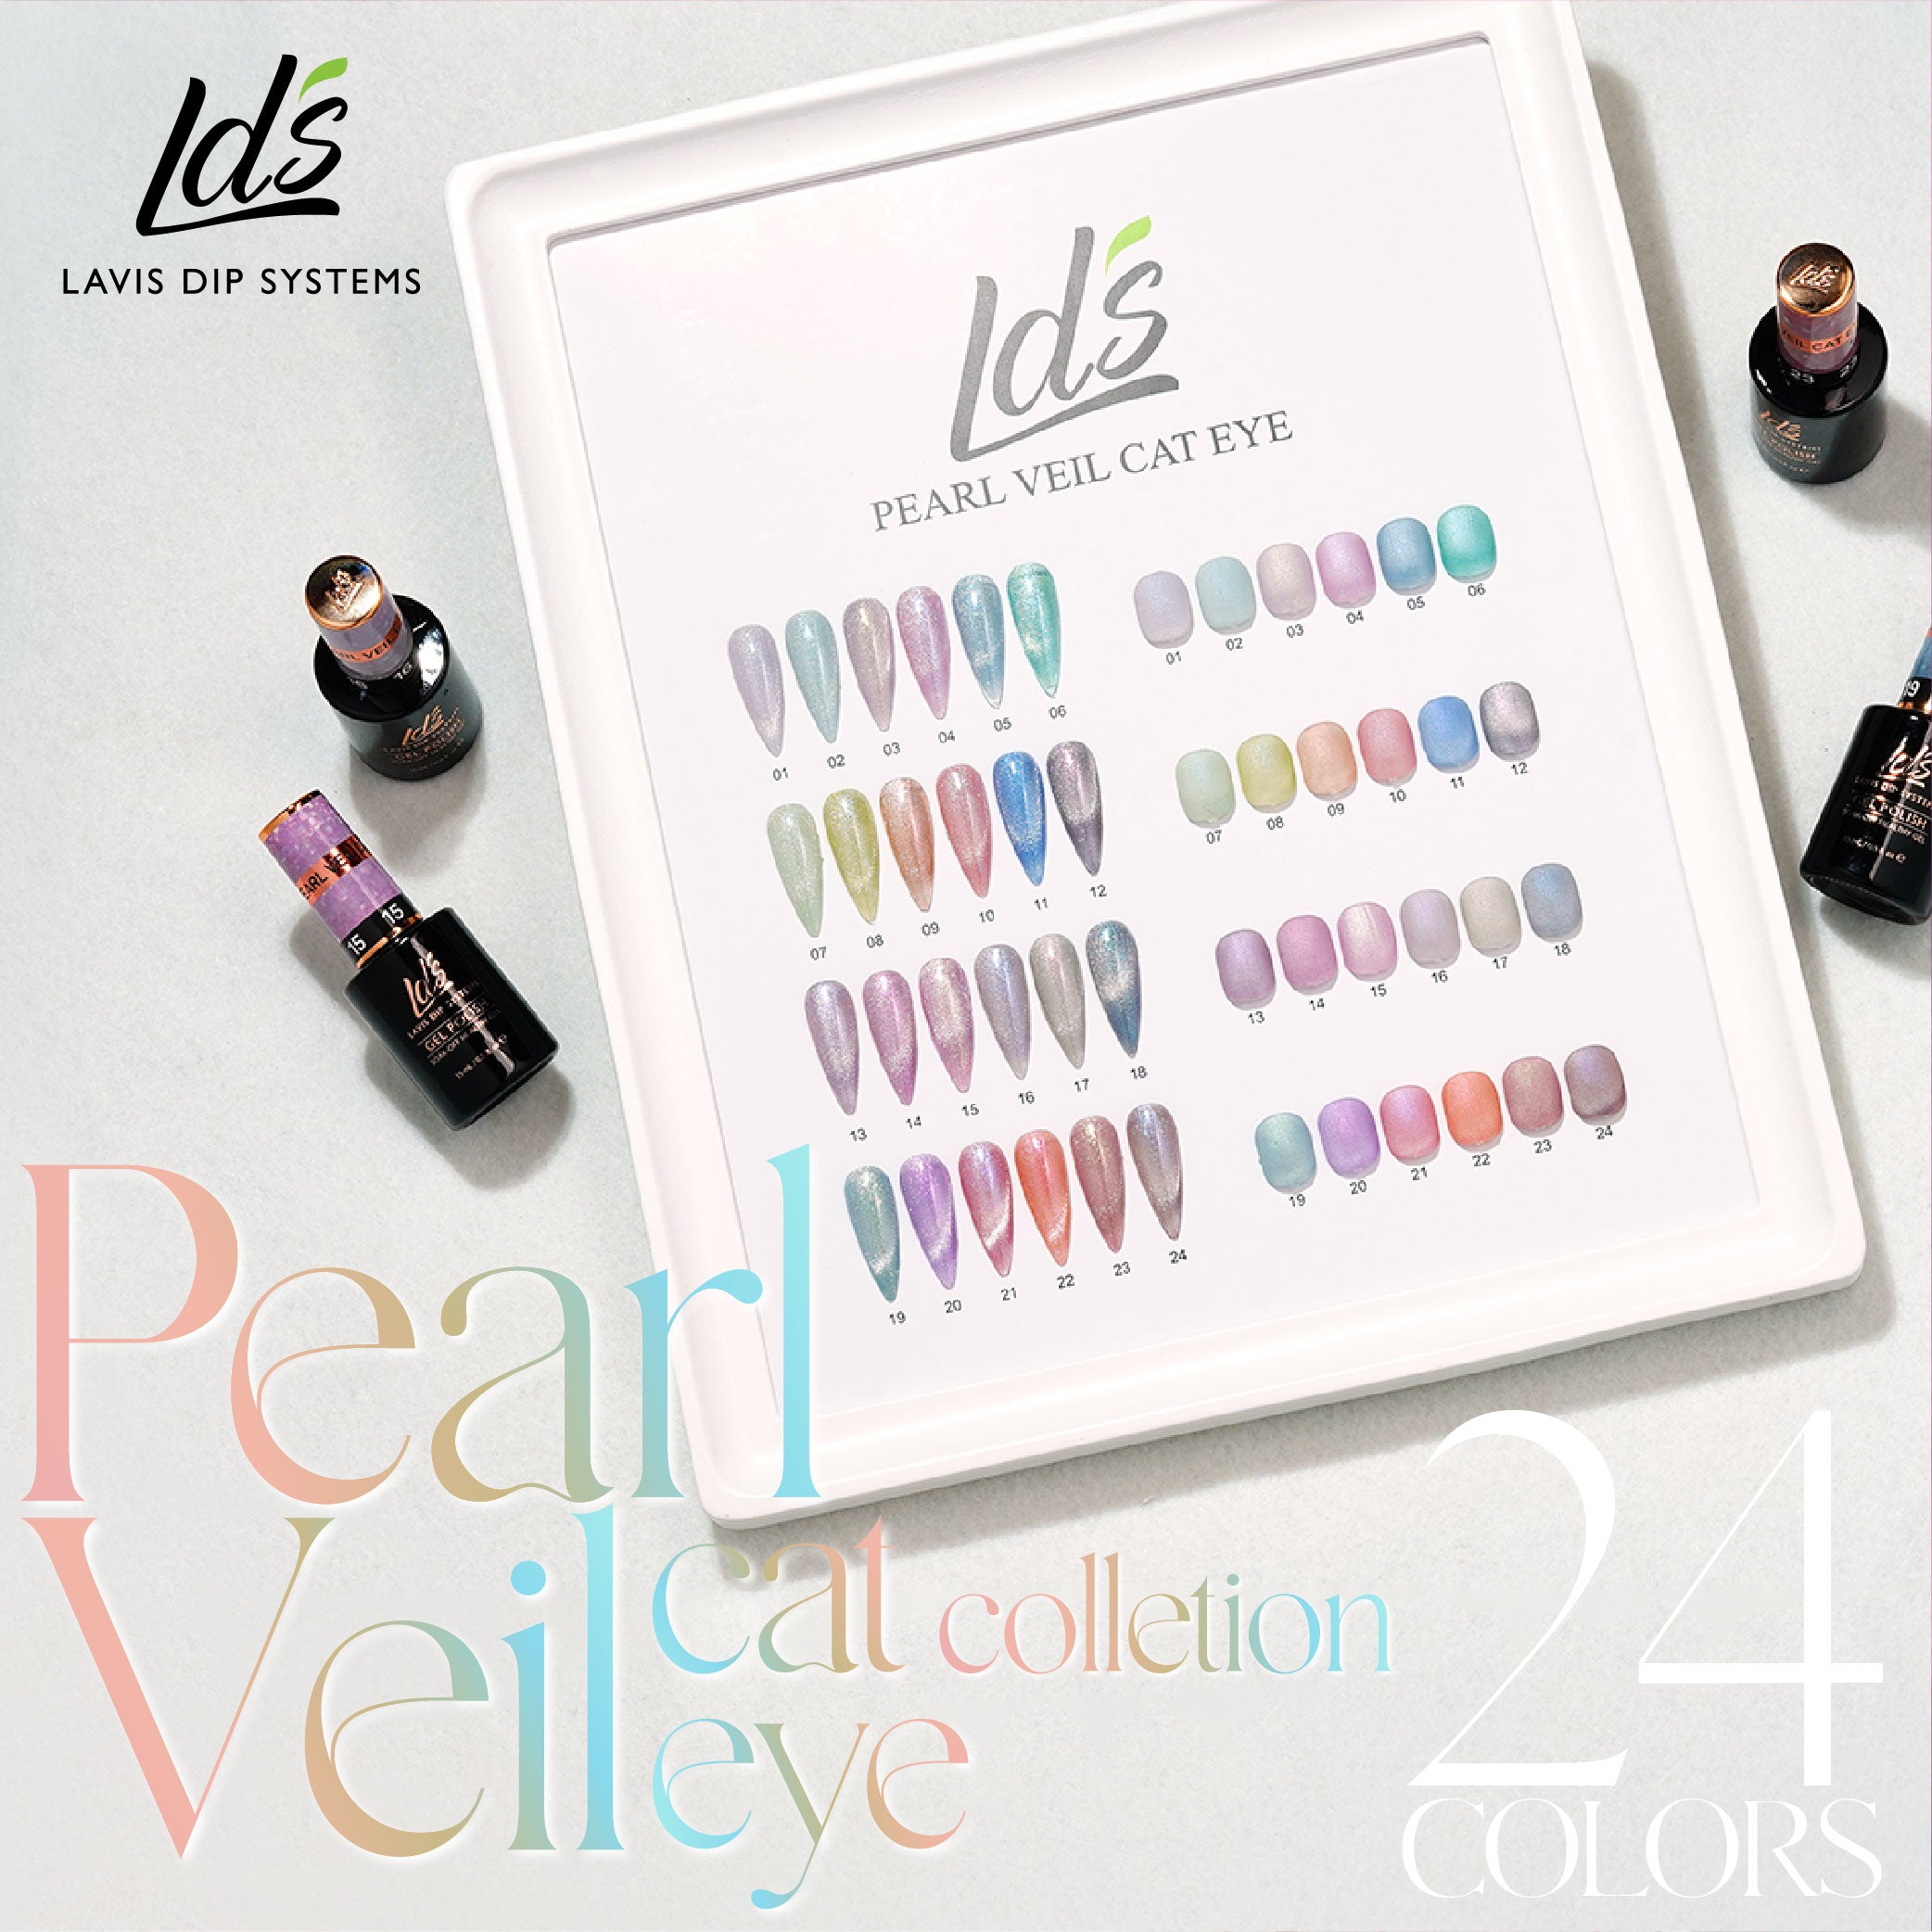 LDS Pearl CE - 10 - Pearl Veil Cat Eye Collection